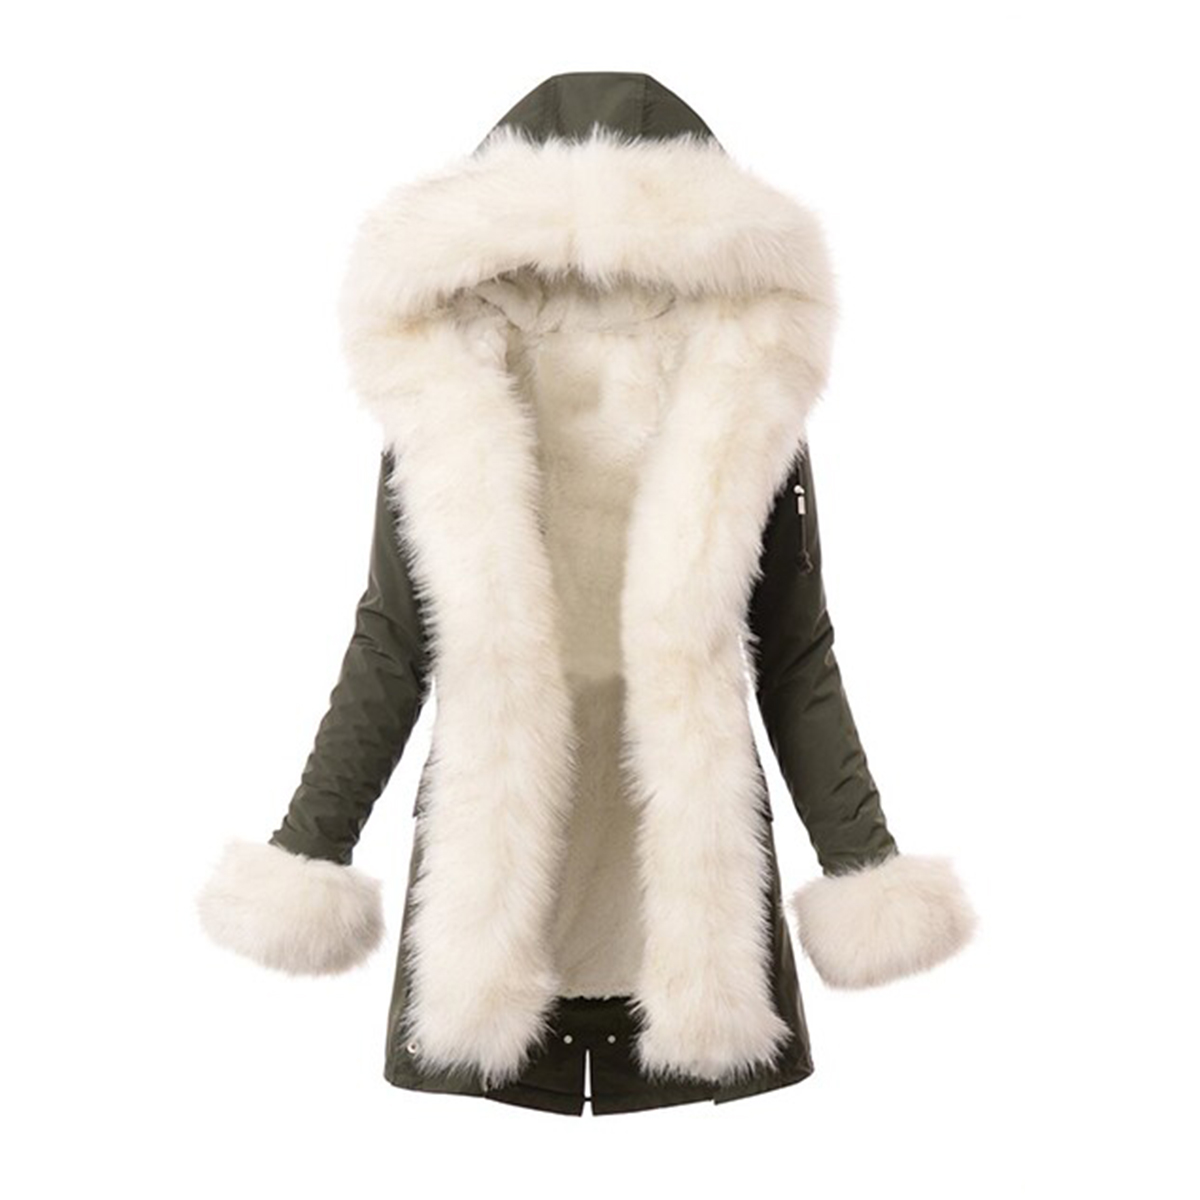 PARKA 2IN1 JACKET GREEN WITH WHITE FUR